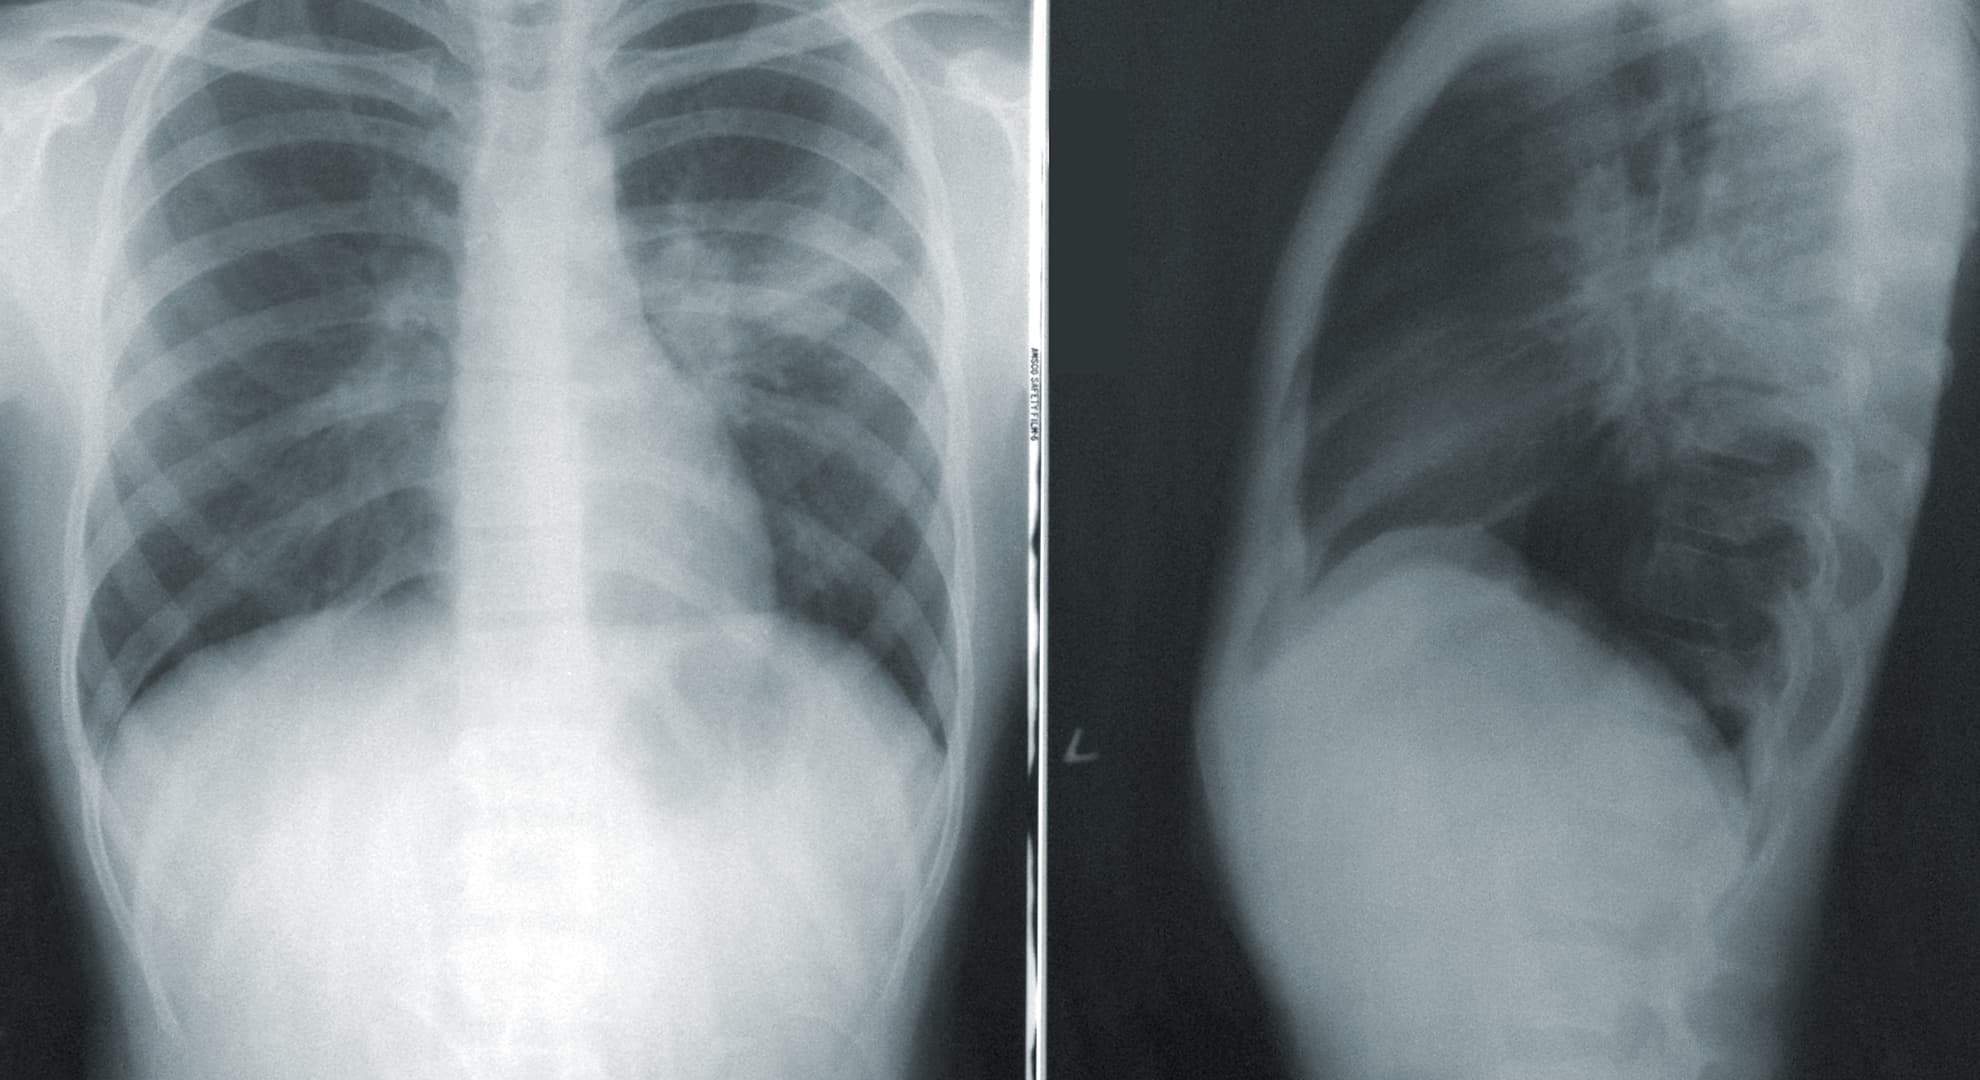 A chest x-ray showing a patient with COVID-19.